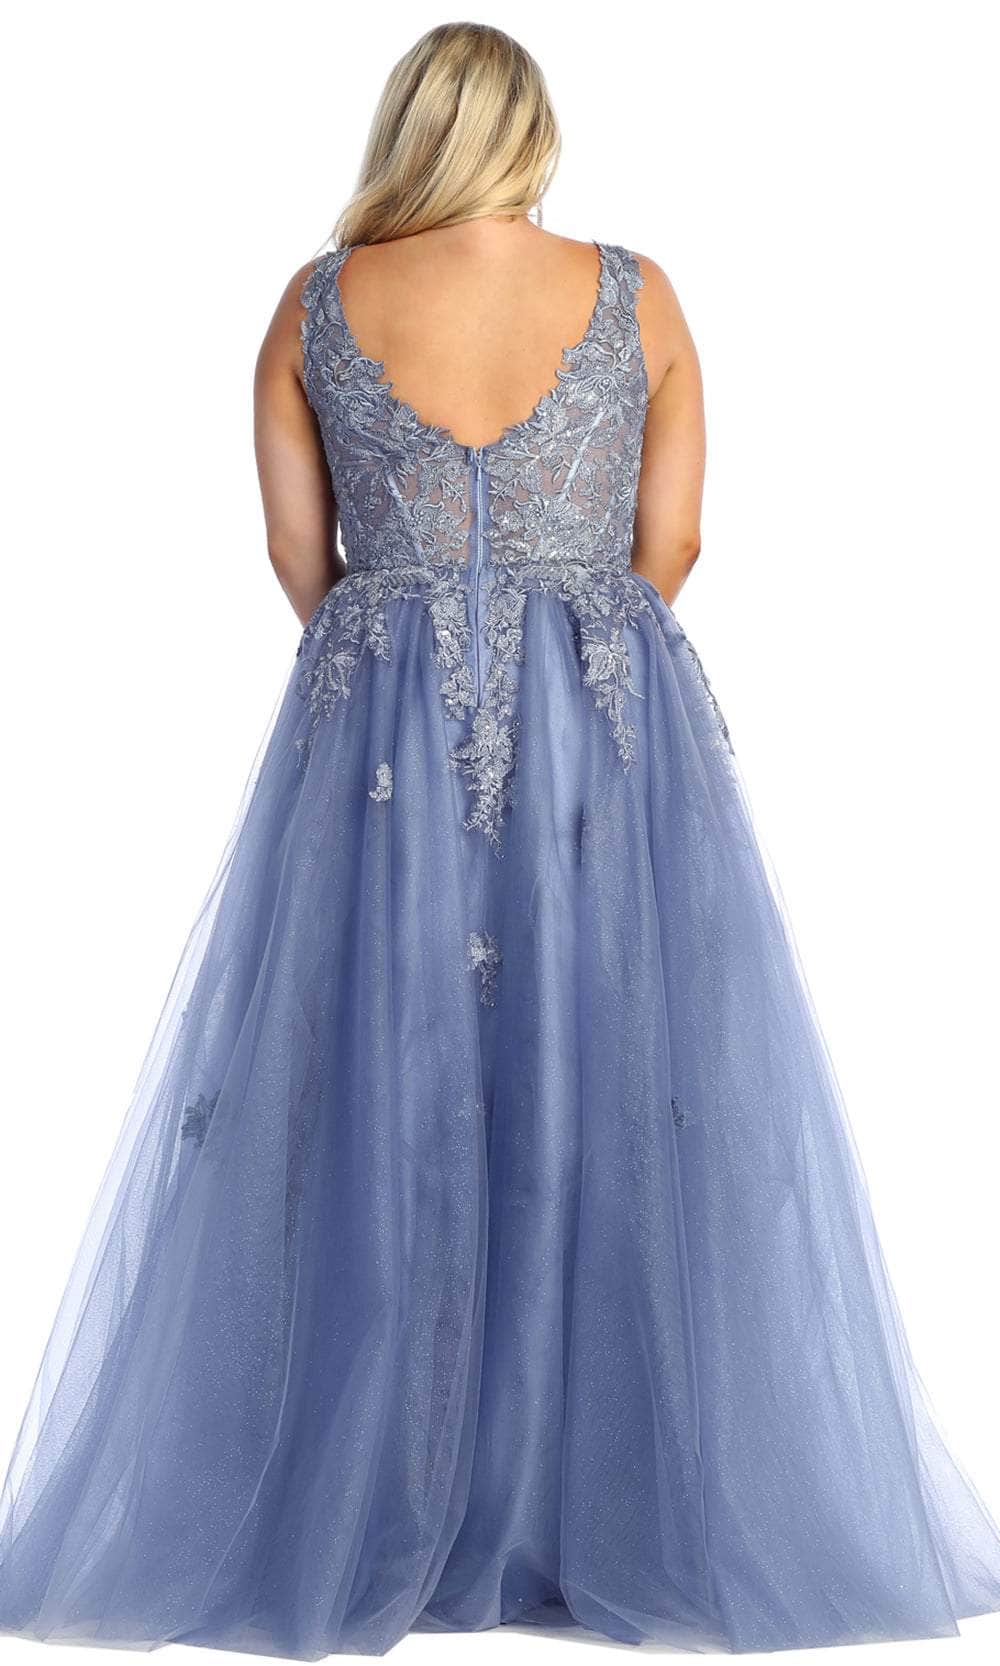 Royal Blue Ball Gown With 3D Floral Applique And Lace Tulle 2021 Blue Corset  Prom Dress For Quinceanera, Princess Sweet 16 With Long Corset At  Affordable Price From Lovemydress, $76.5